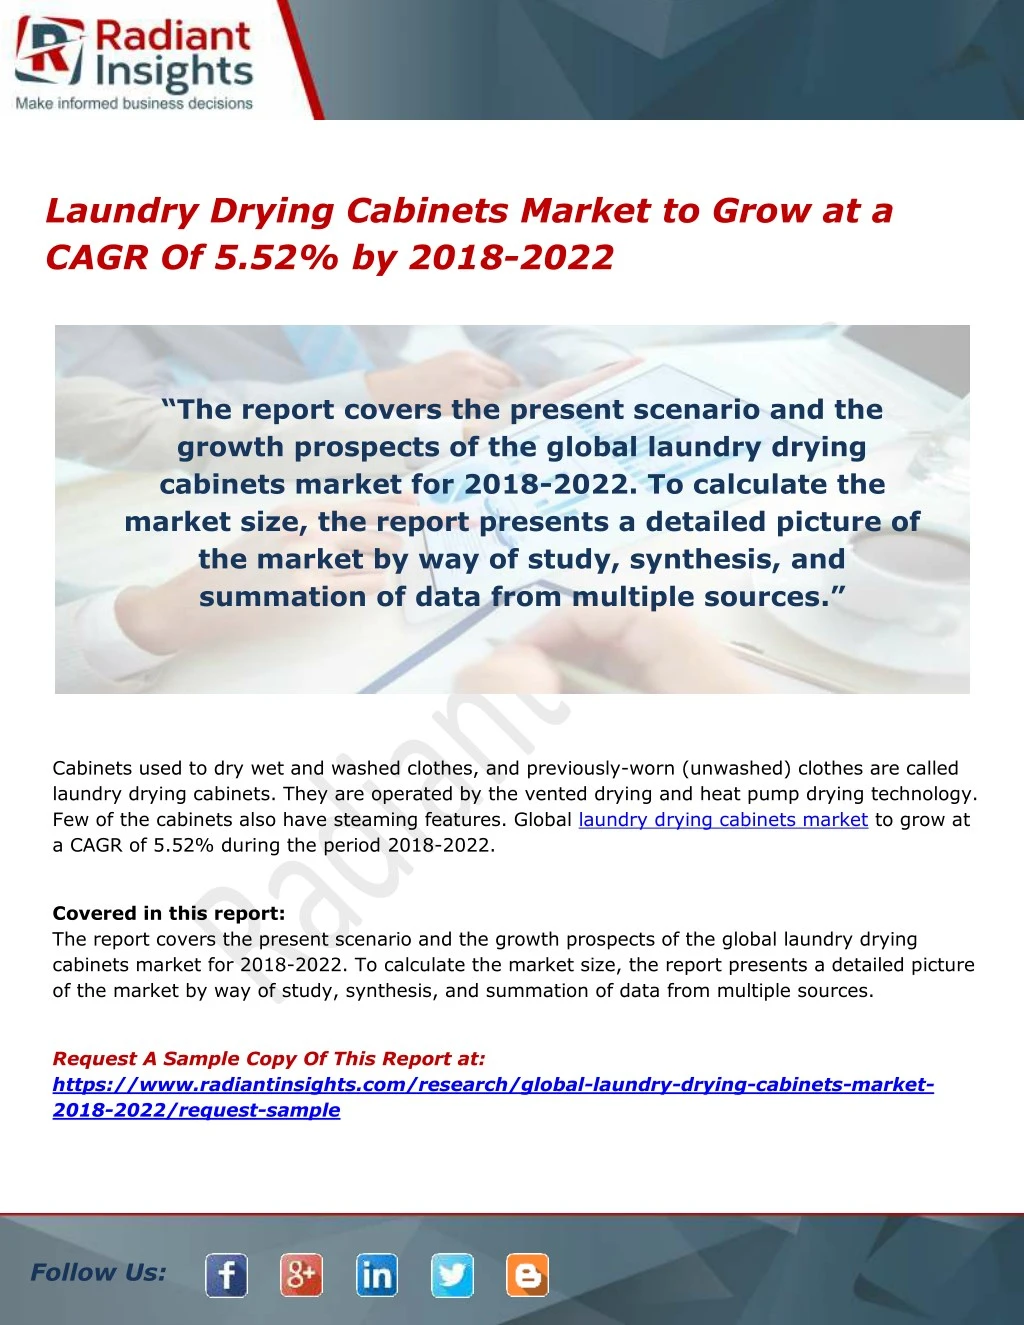 laundry drying cabinets market to grow at a cagr